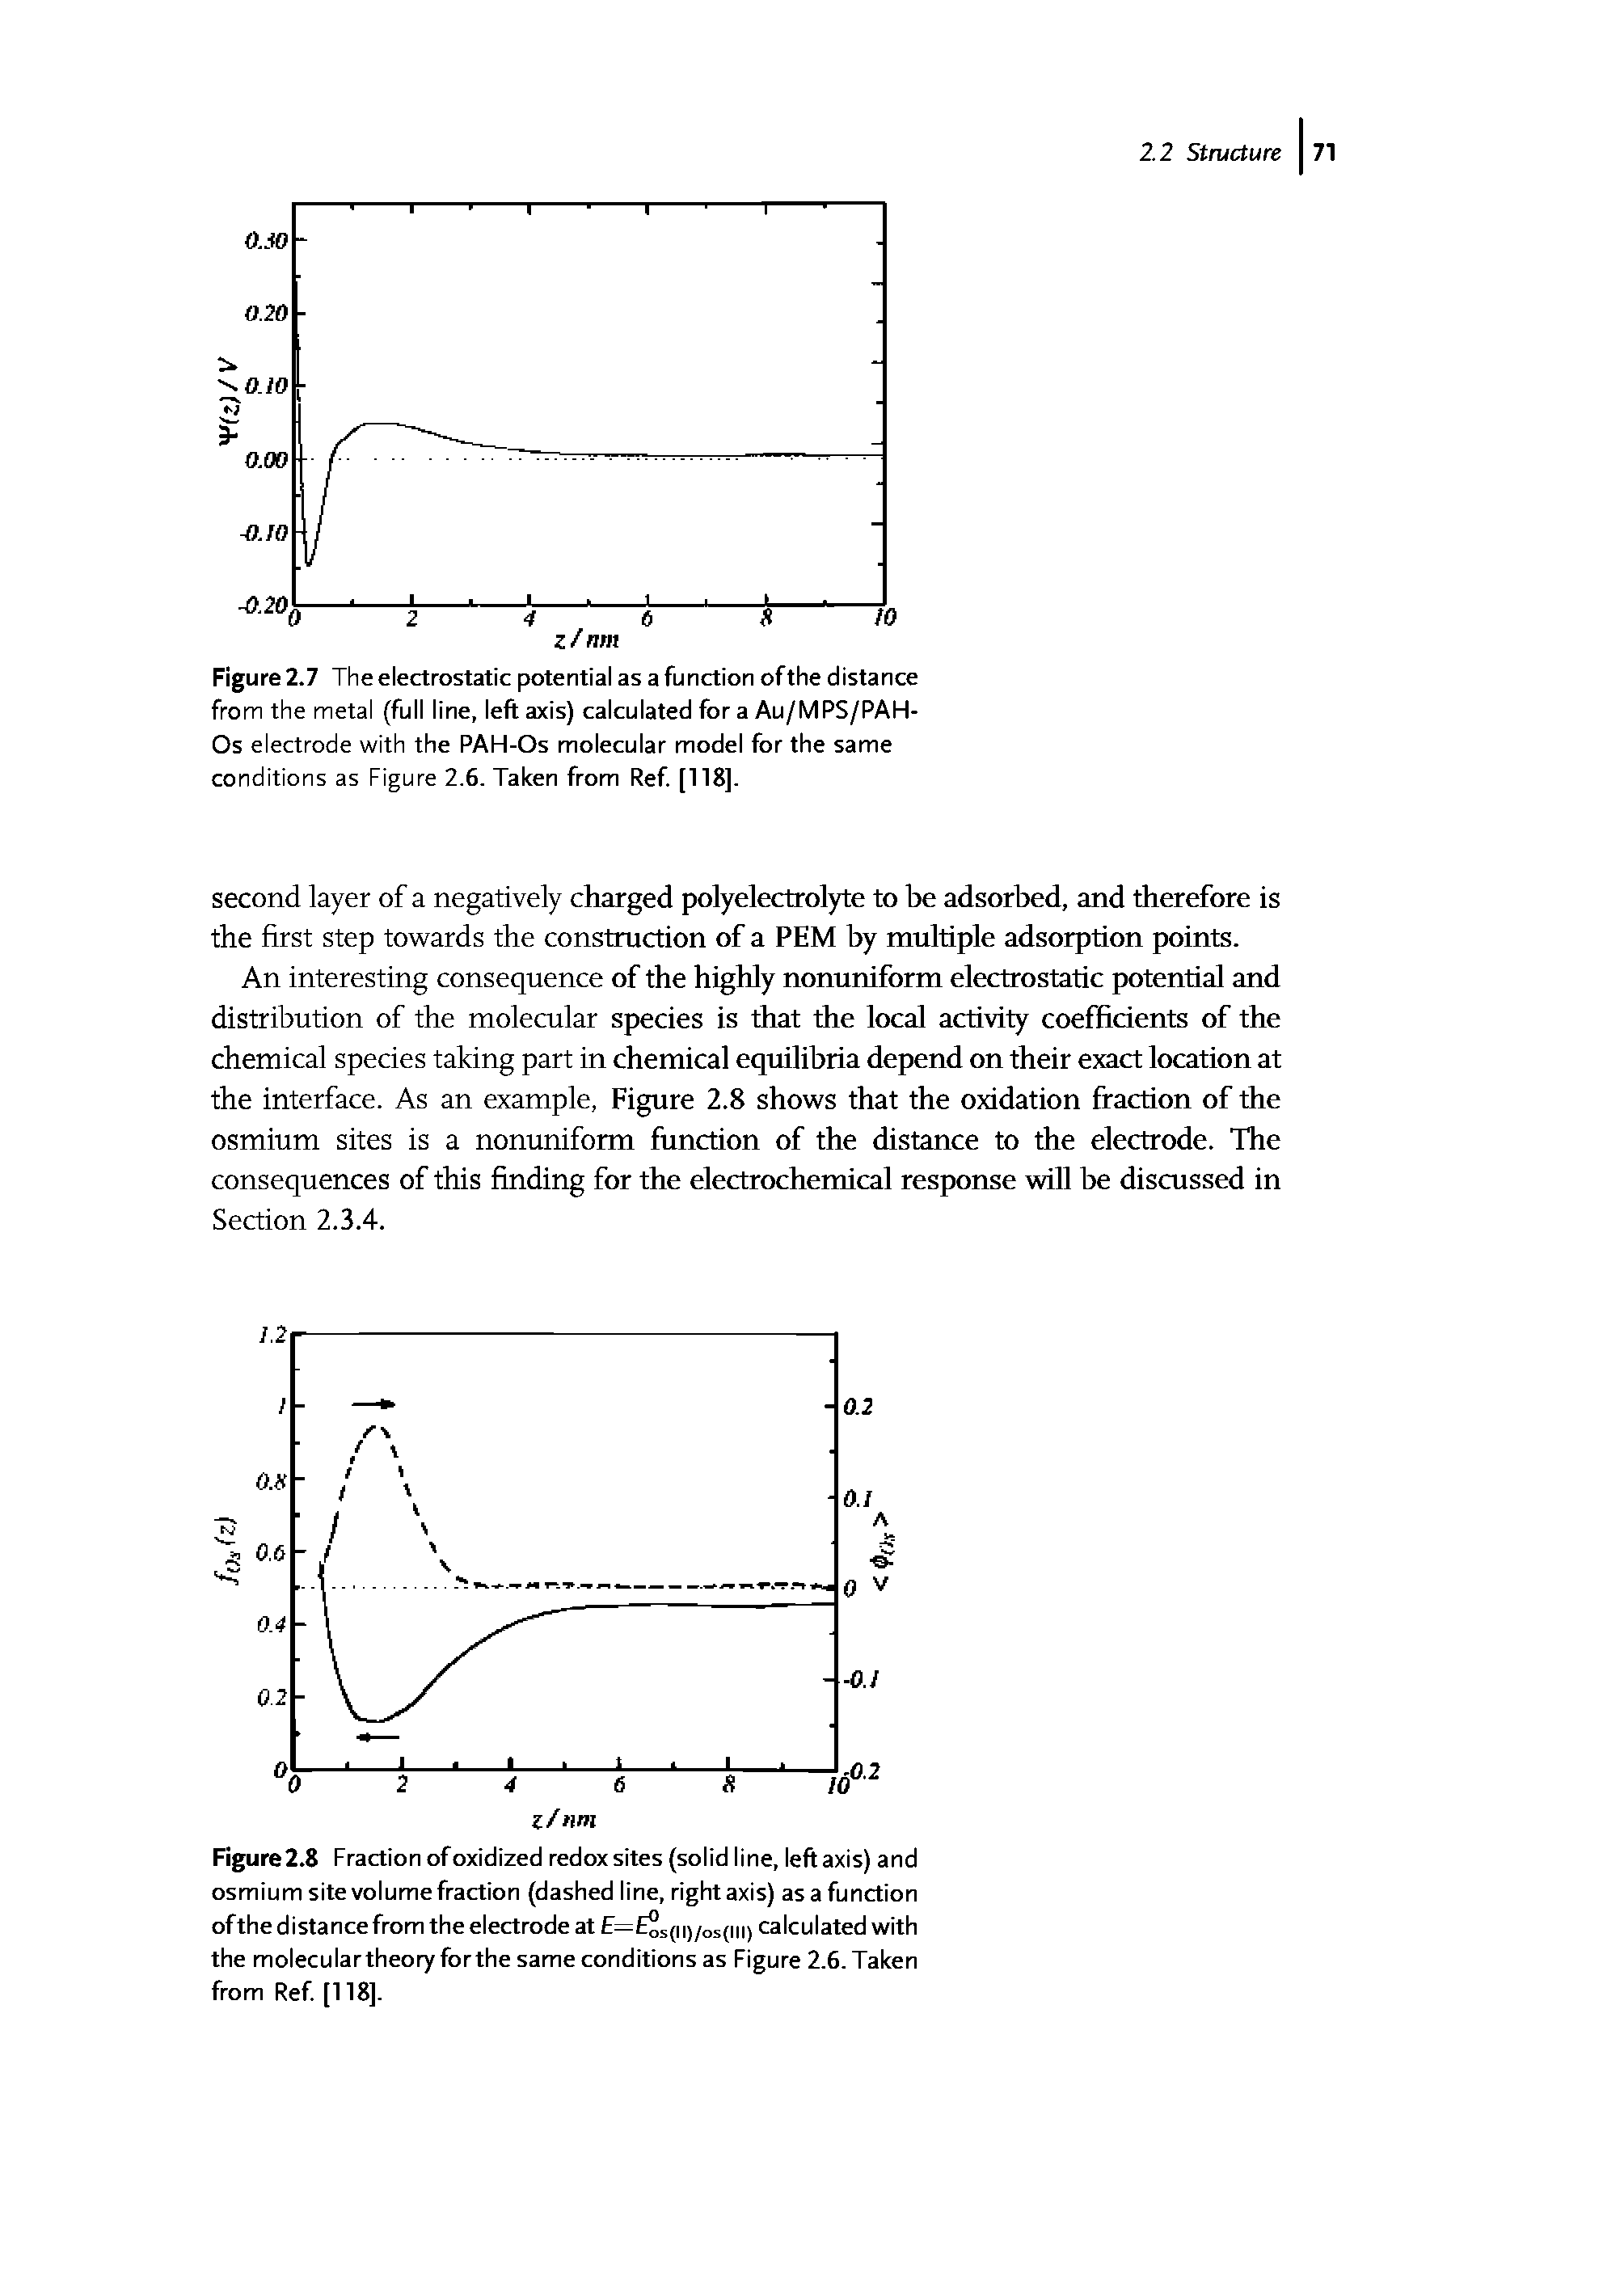 Figure2.8 Fraction of oxidized redox sites (solid line, left axis) and osmium site volume fraction (dashed line, right axis) as a function ofthe distance from the electrode at f= 2s(ii)/os(iii) calculated with the moleculartheory forthe same conditions as Figure 2.6. Taken from Ref [118].